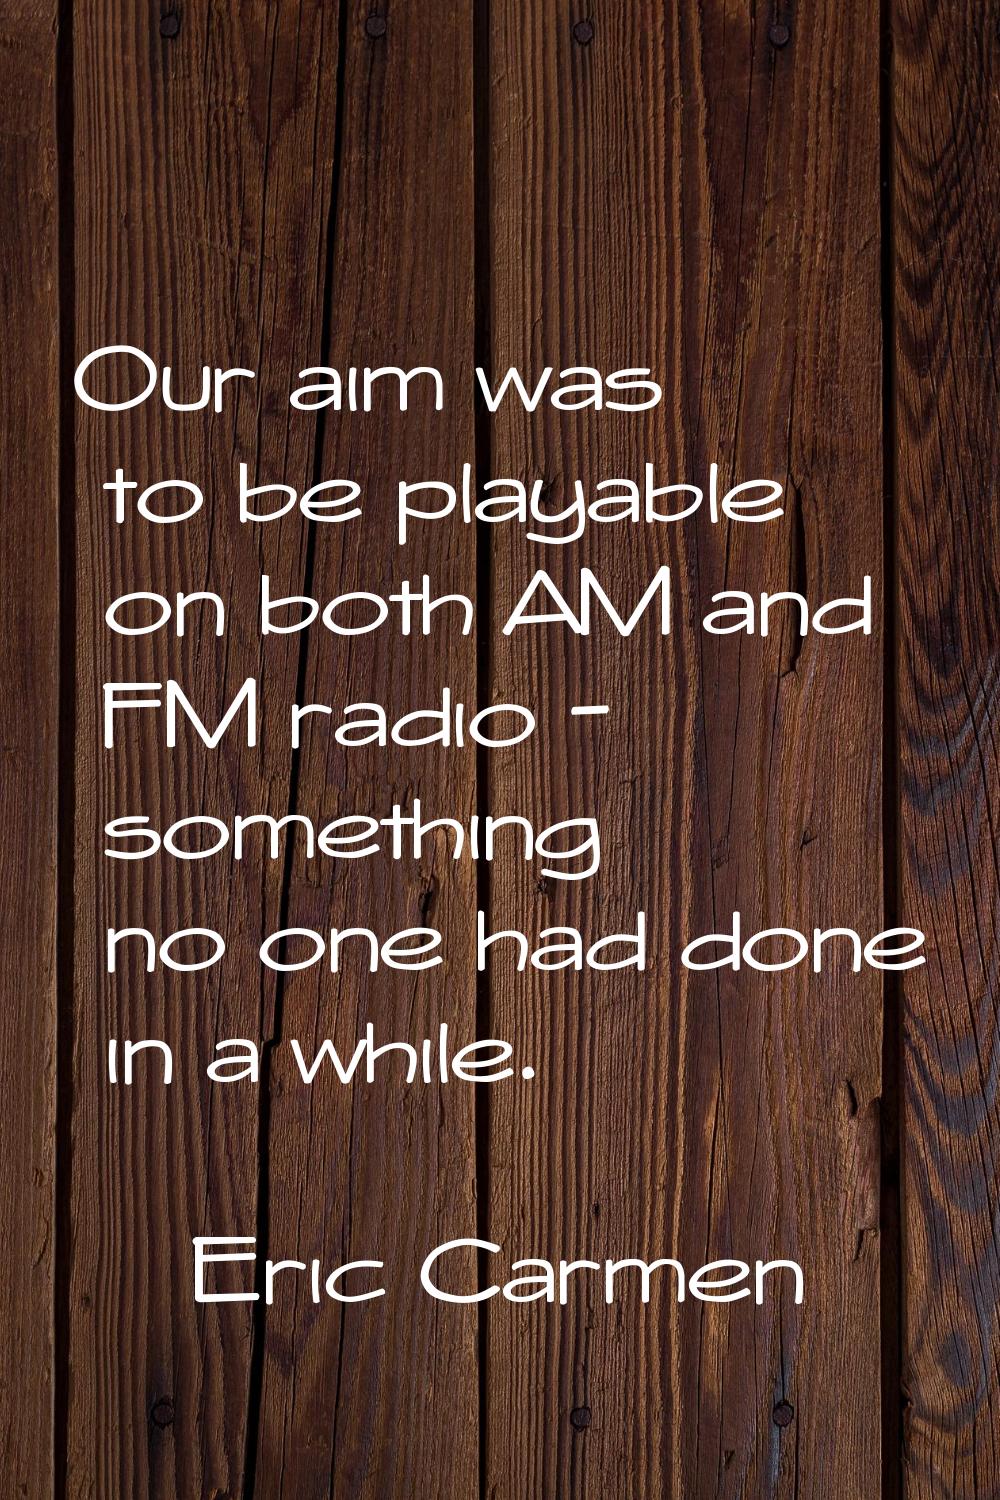 Our aim was to be playable on both AM and FM radio - something no one had done in a while.